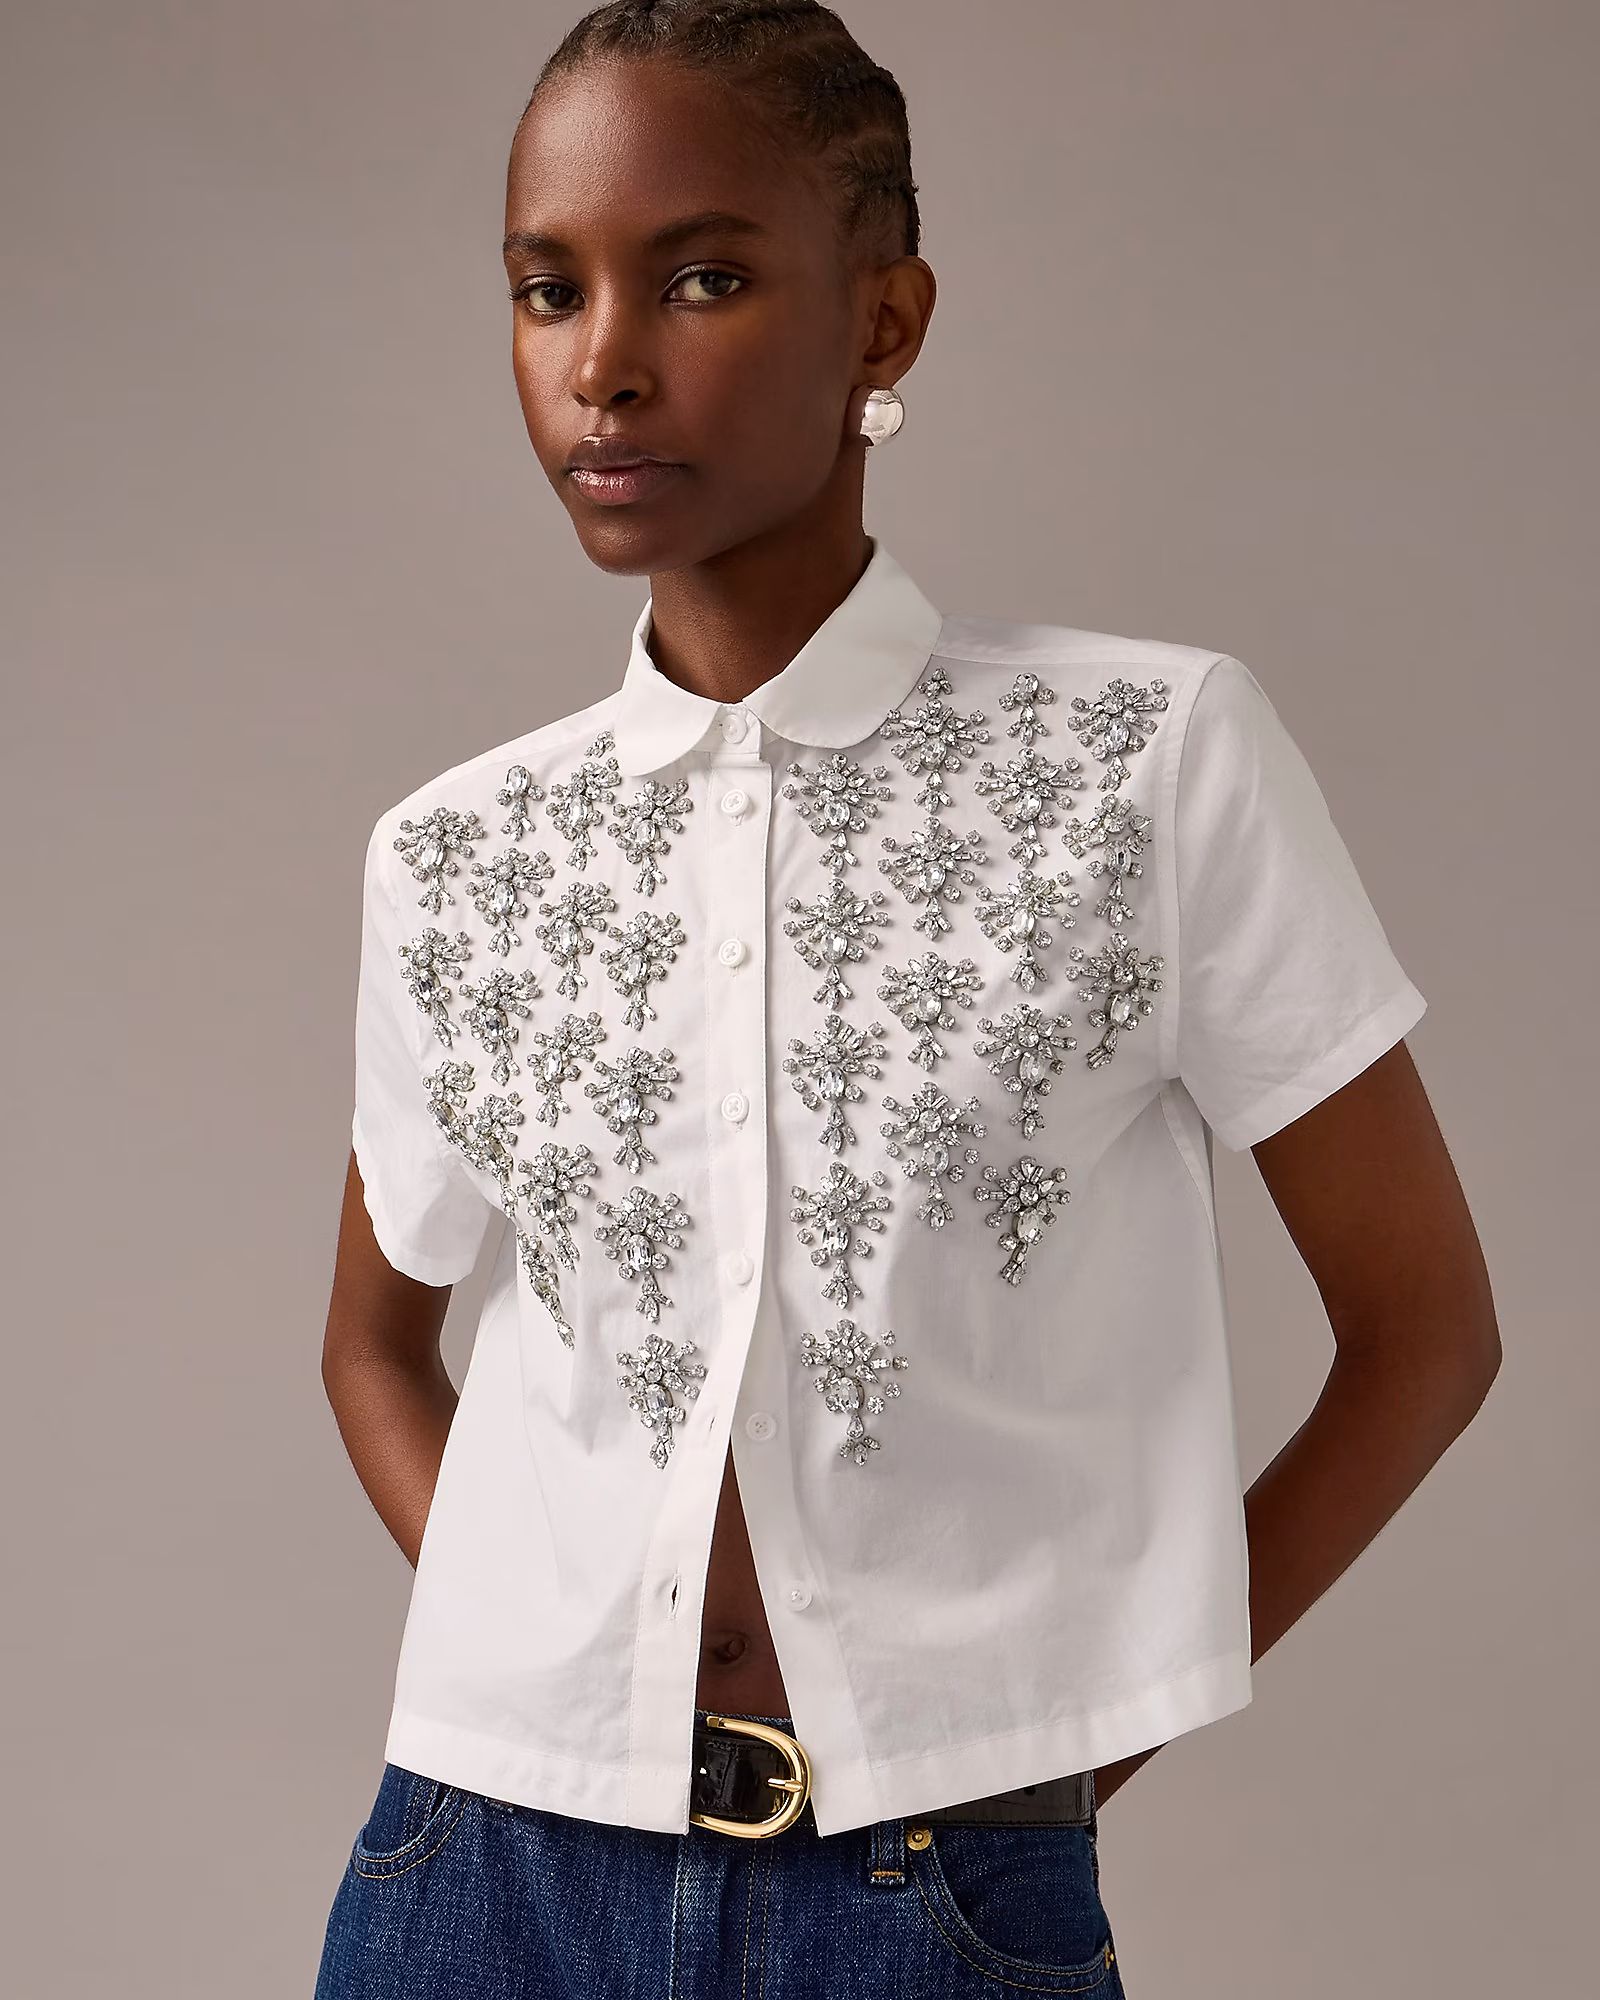 newCollection cropped button-up shirt with embellishments$168.0030% off full price with code SHOP... | J.Crew US